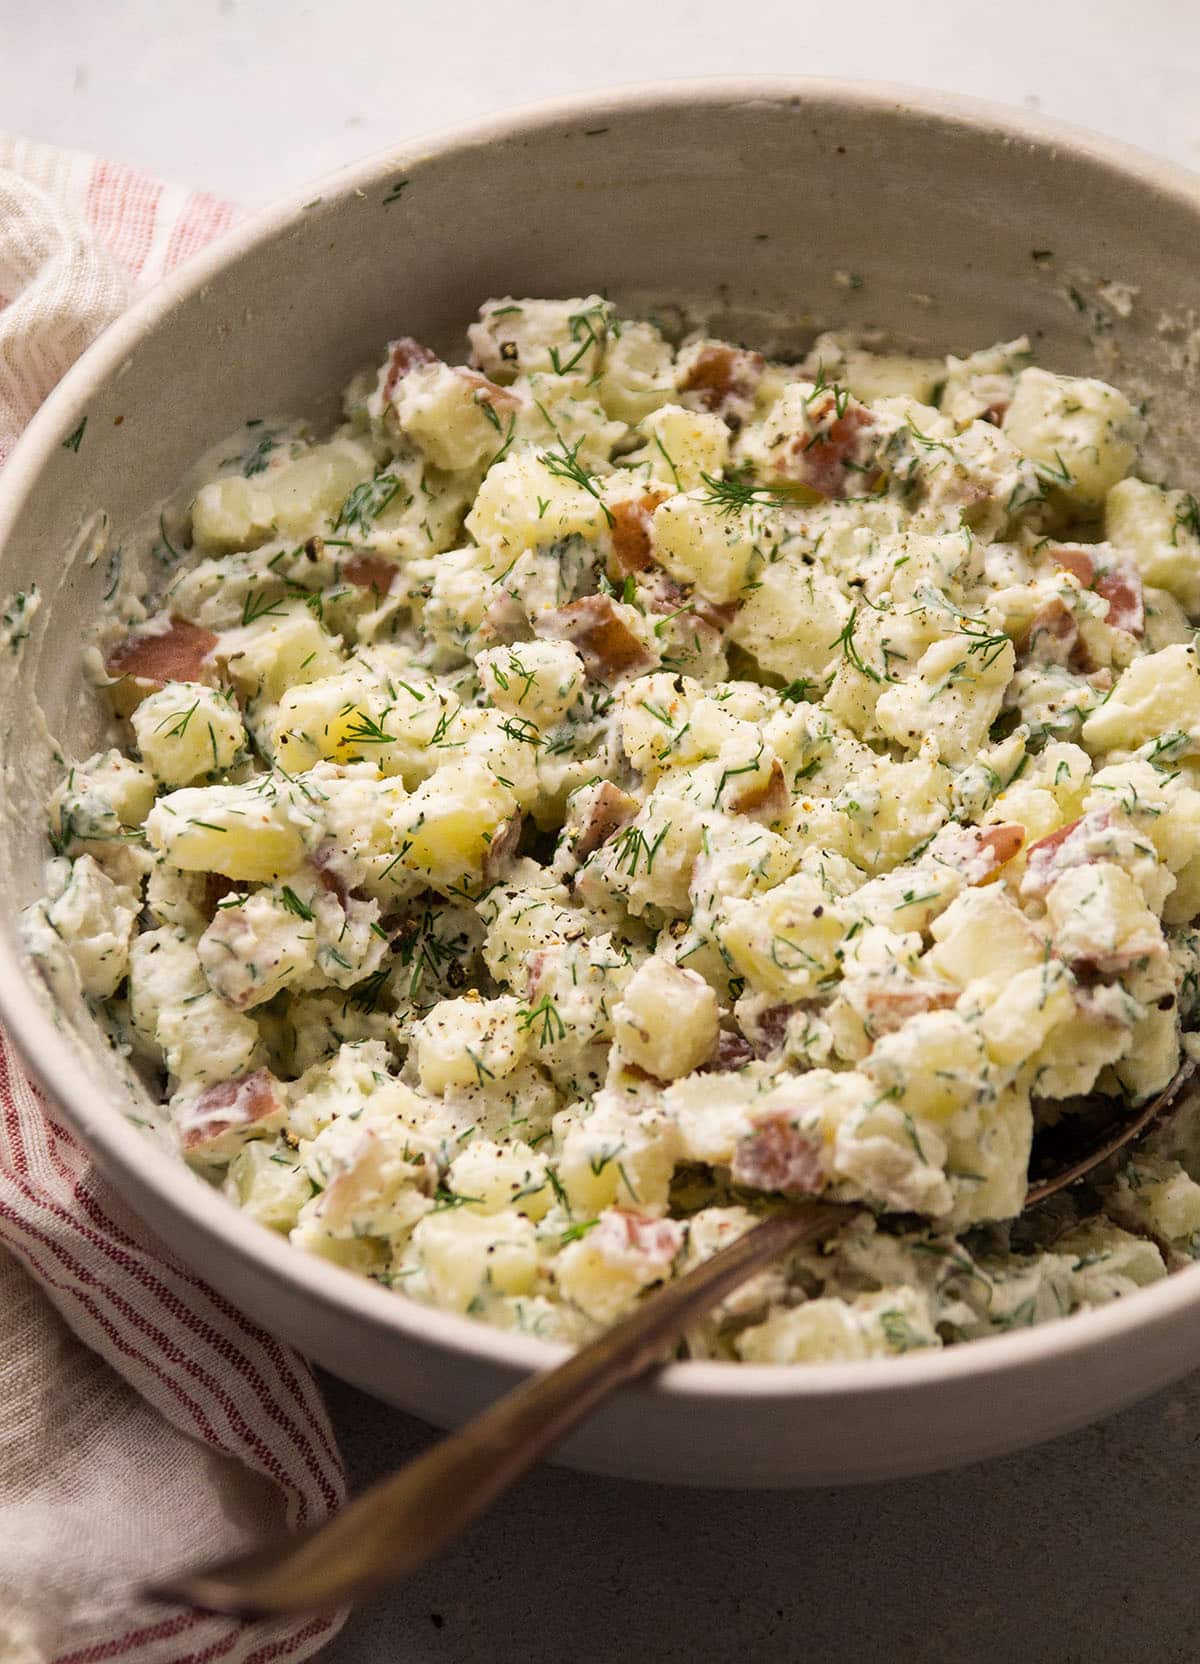 Copper spoon lifting potato salad out of a white bowl.